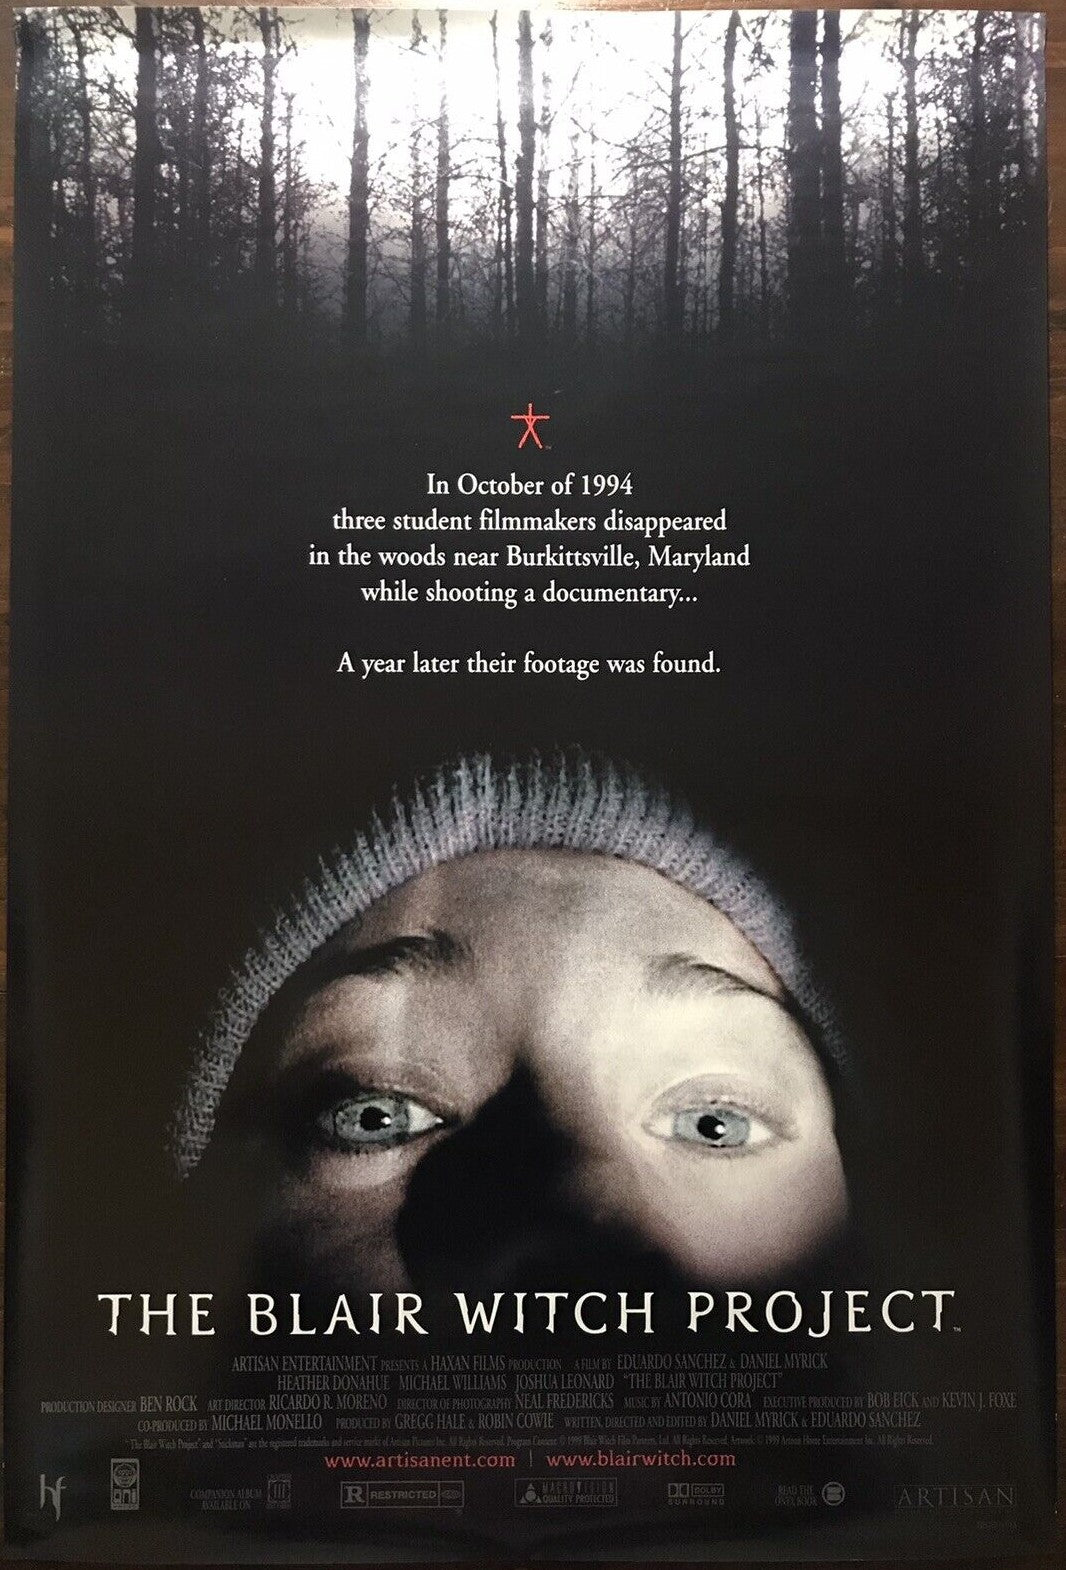 The Blair Witch Project double sided movie poster